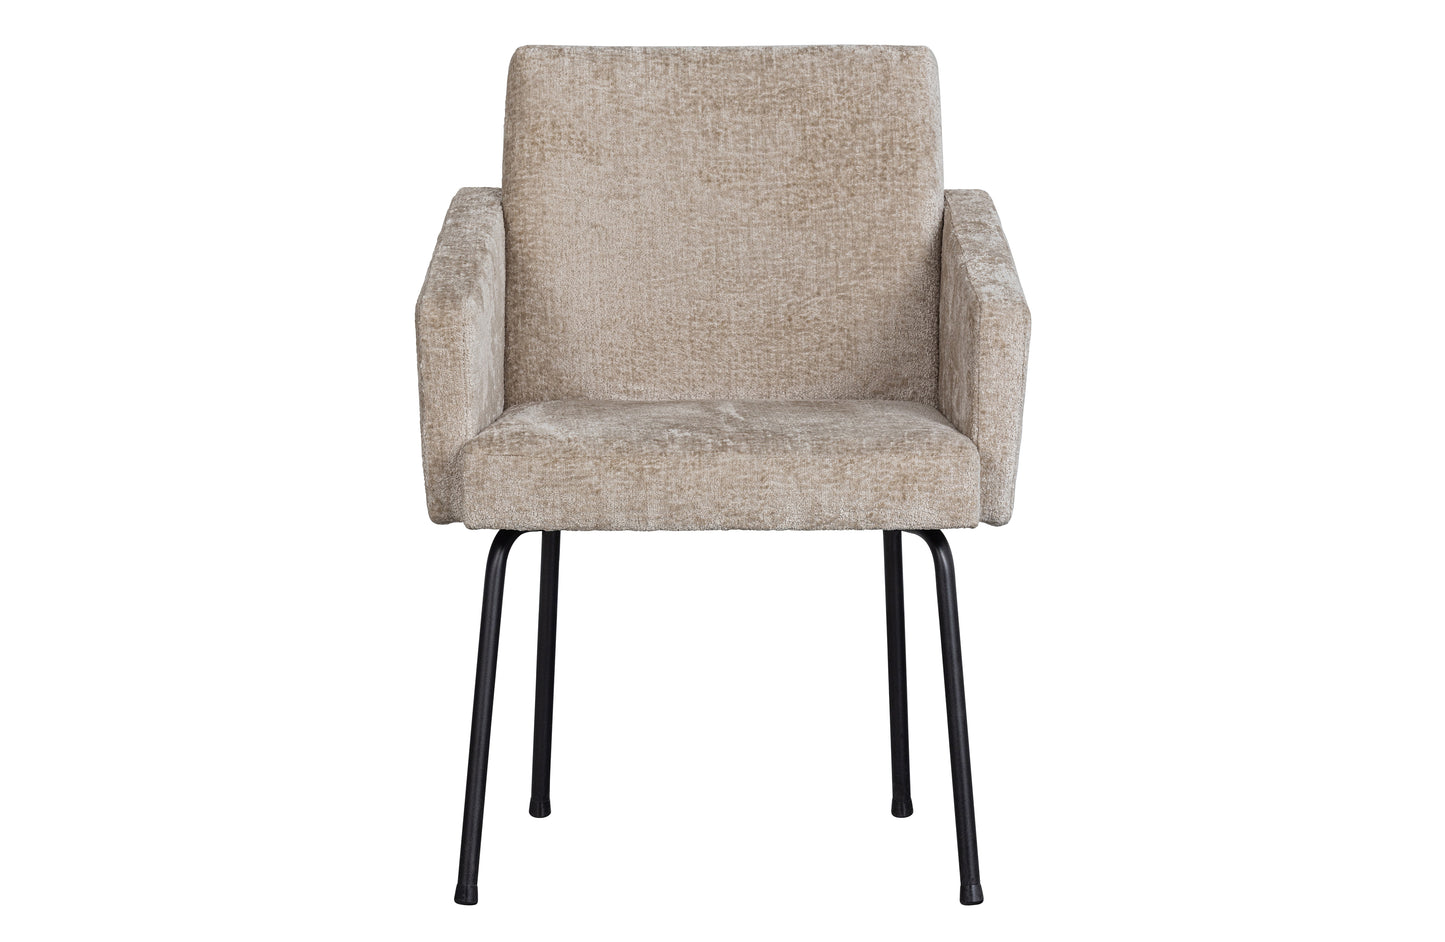 Mount Dining Chair With Armrest Coarse Woven Fabric Natural